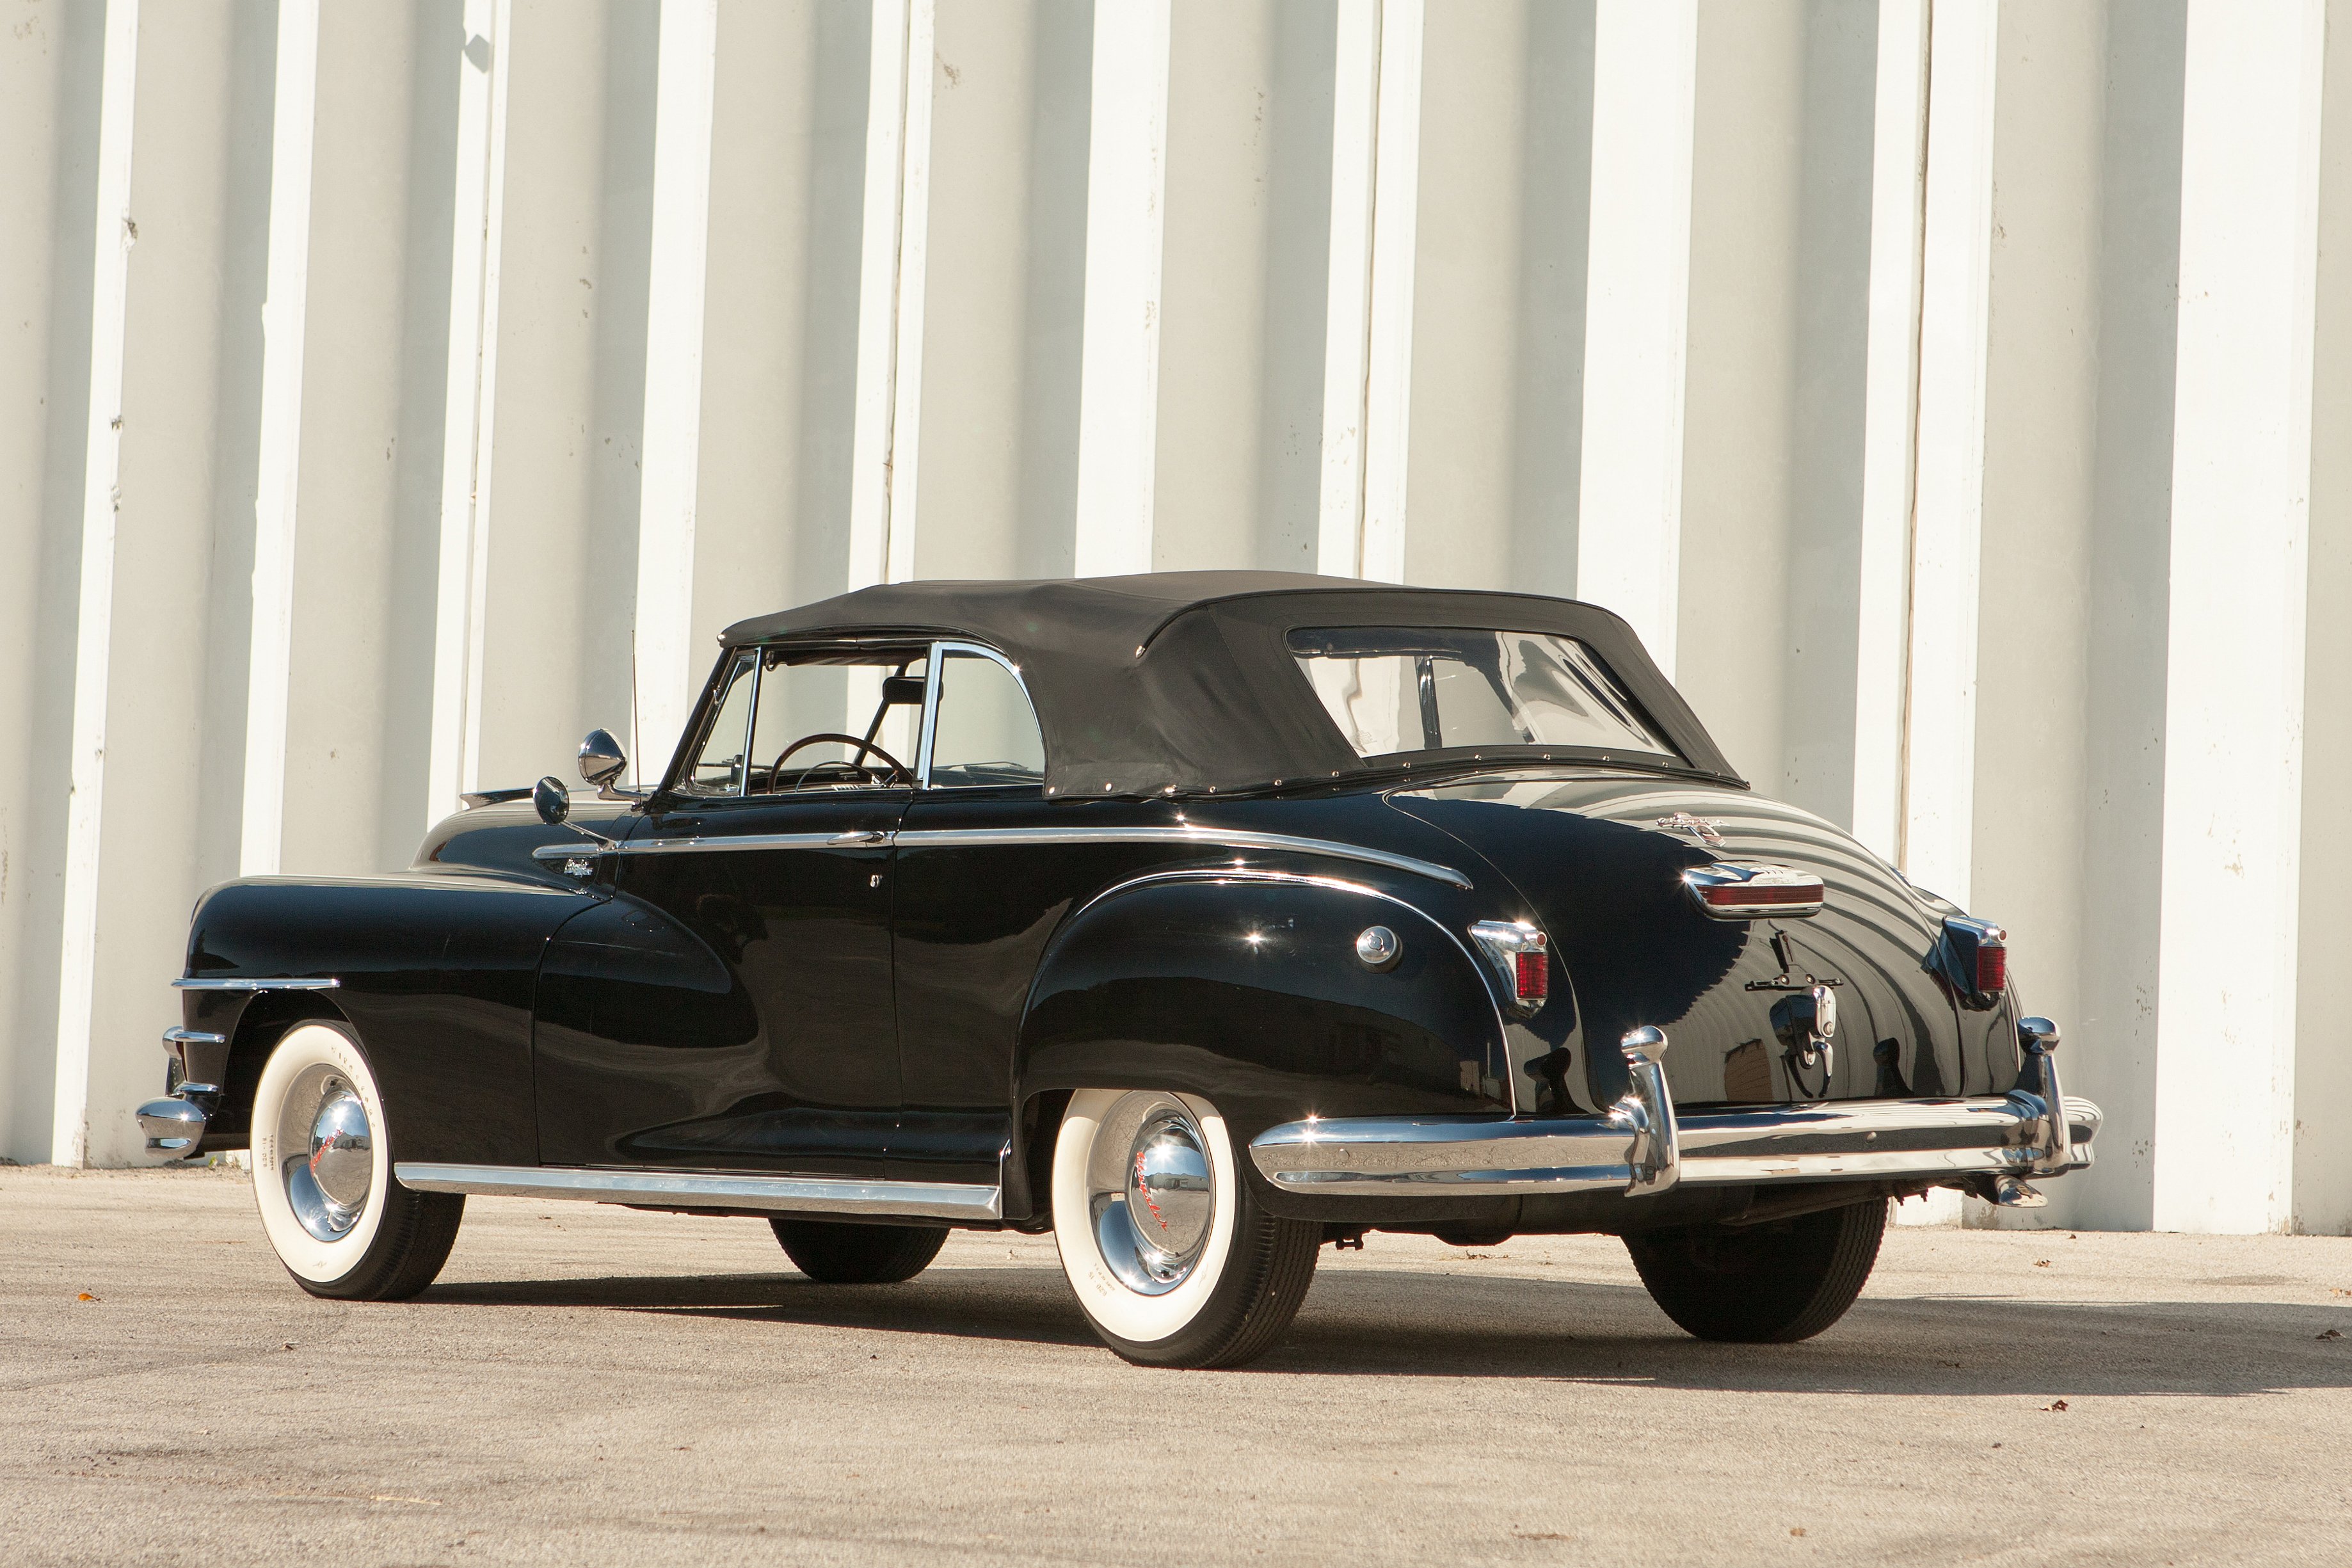 1948, Chrysler, New, Yorker, Convertible, Black, Classic, Old, Vintage, Usa, 3673x2449 03 Wallpaper